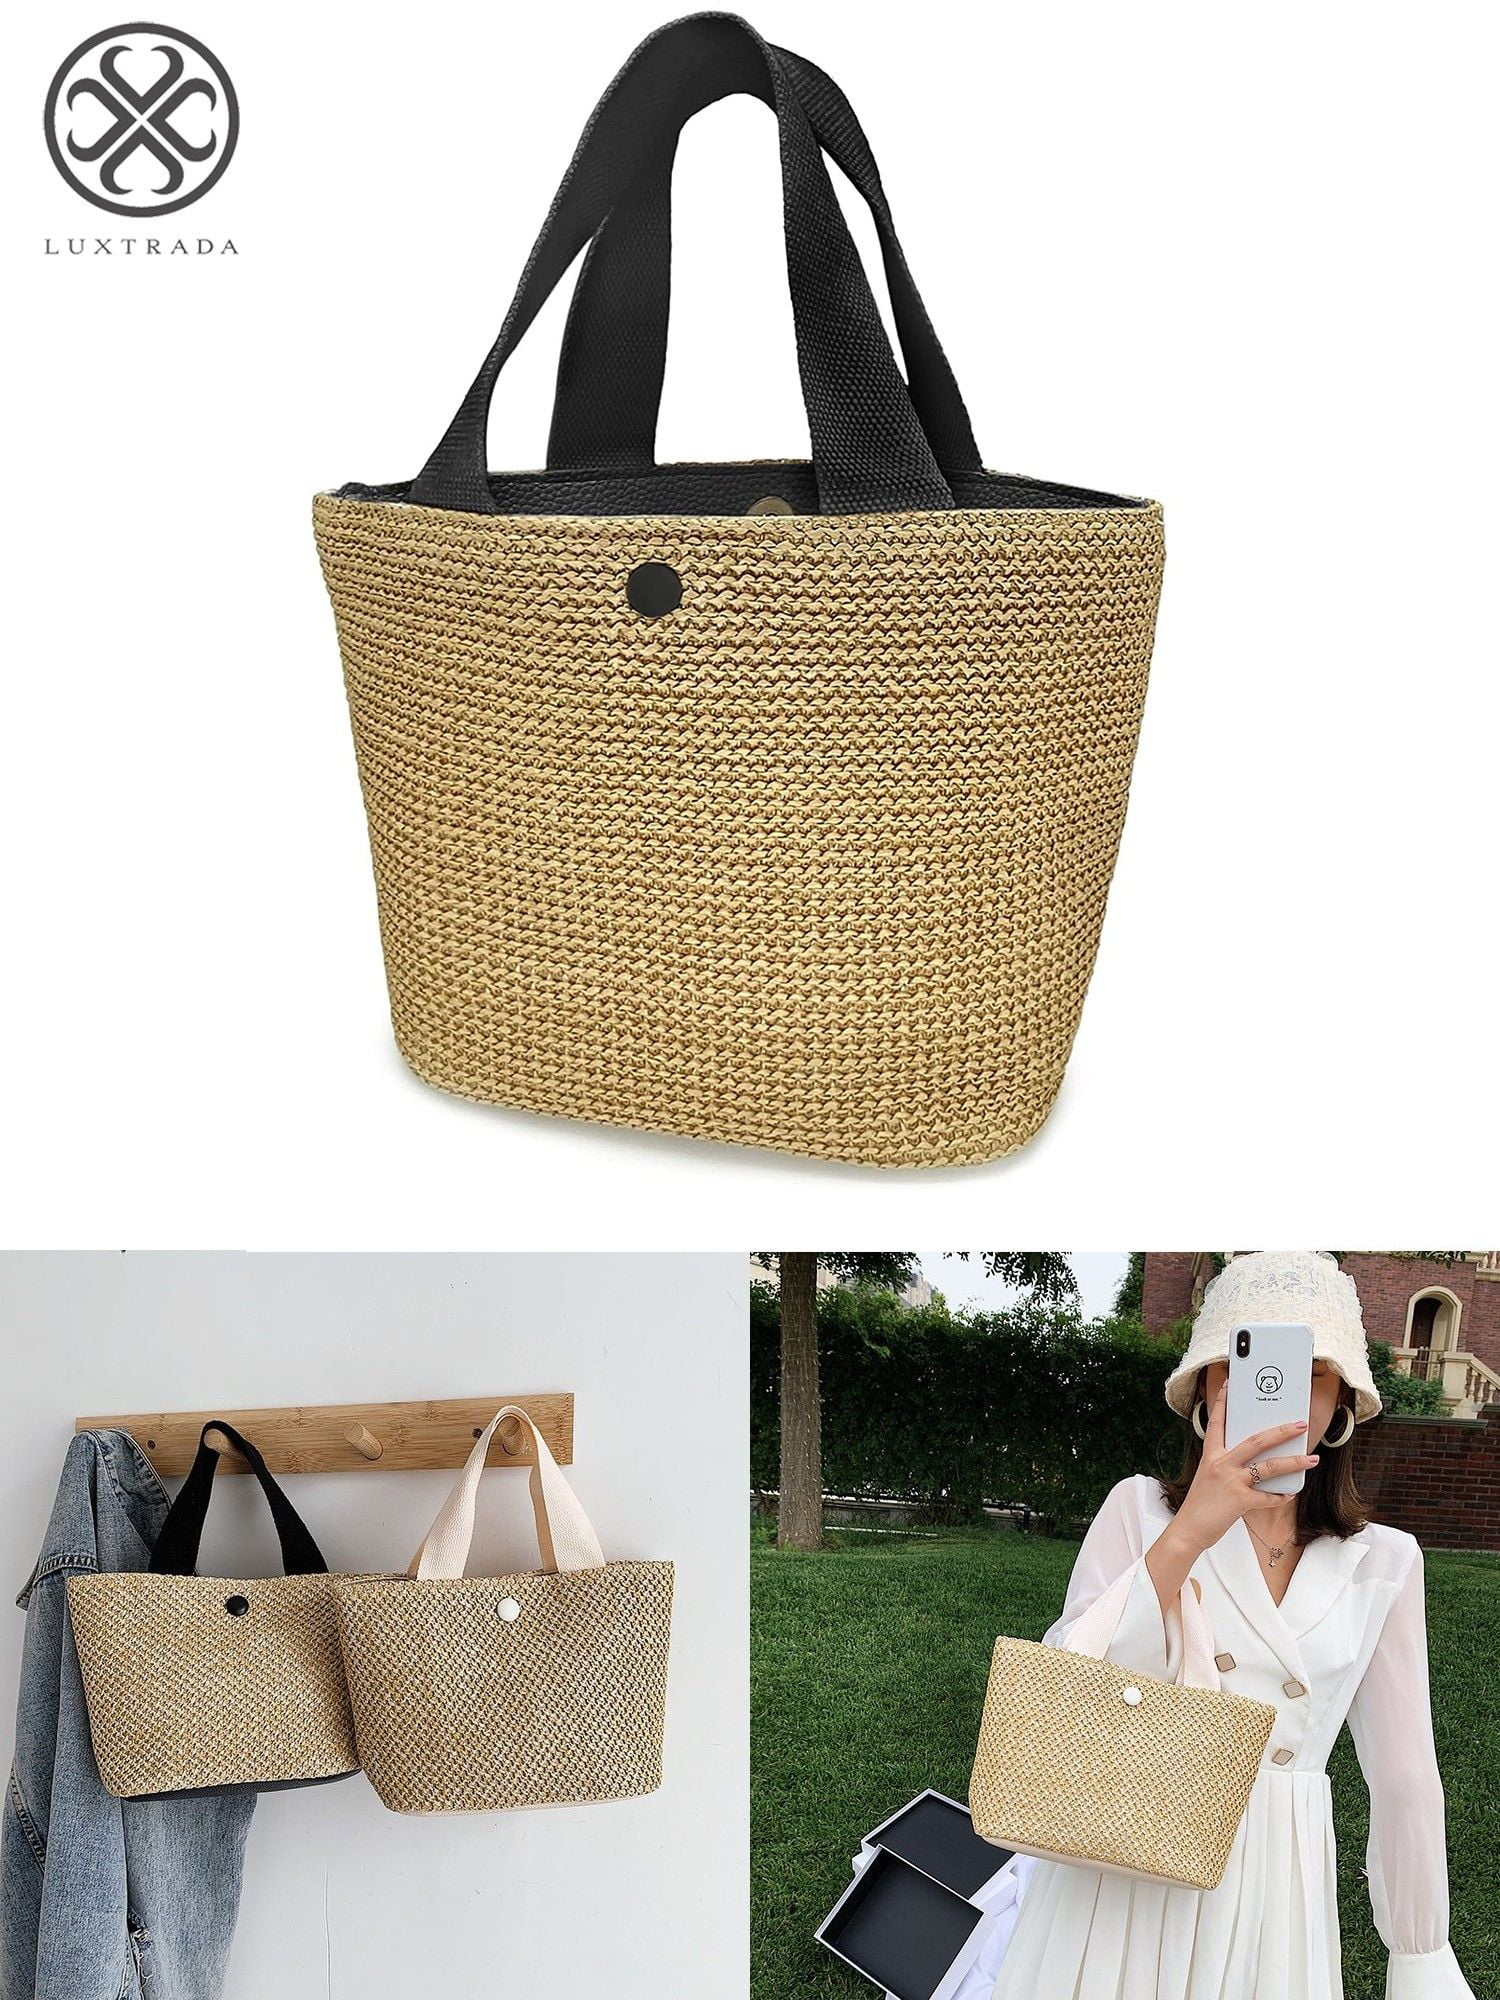 Luxtrada Straw Bags for Women Tote with Handles Boho Beach Tote